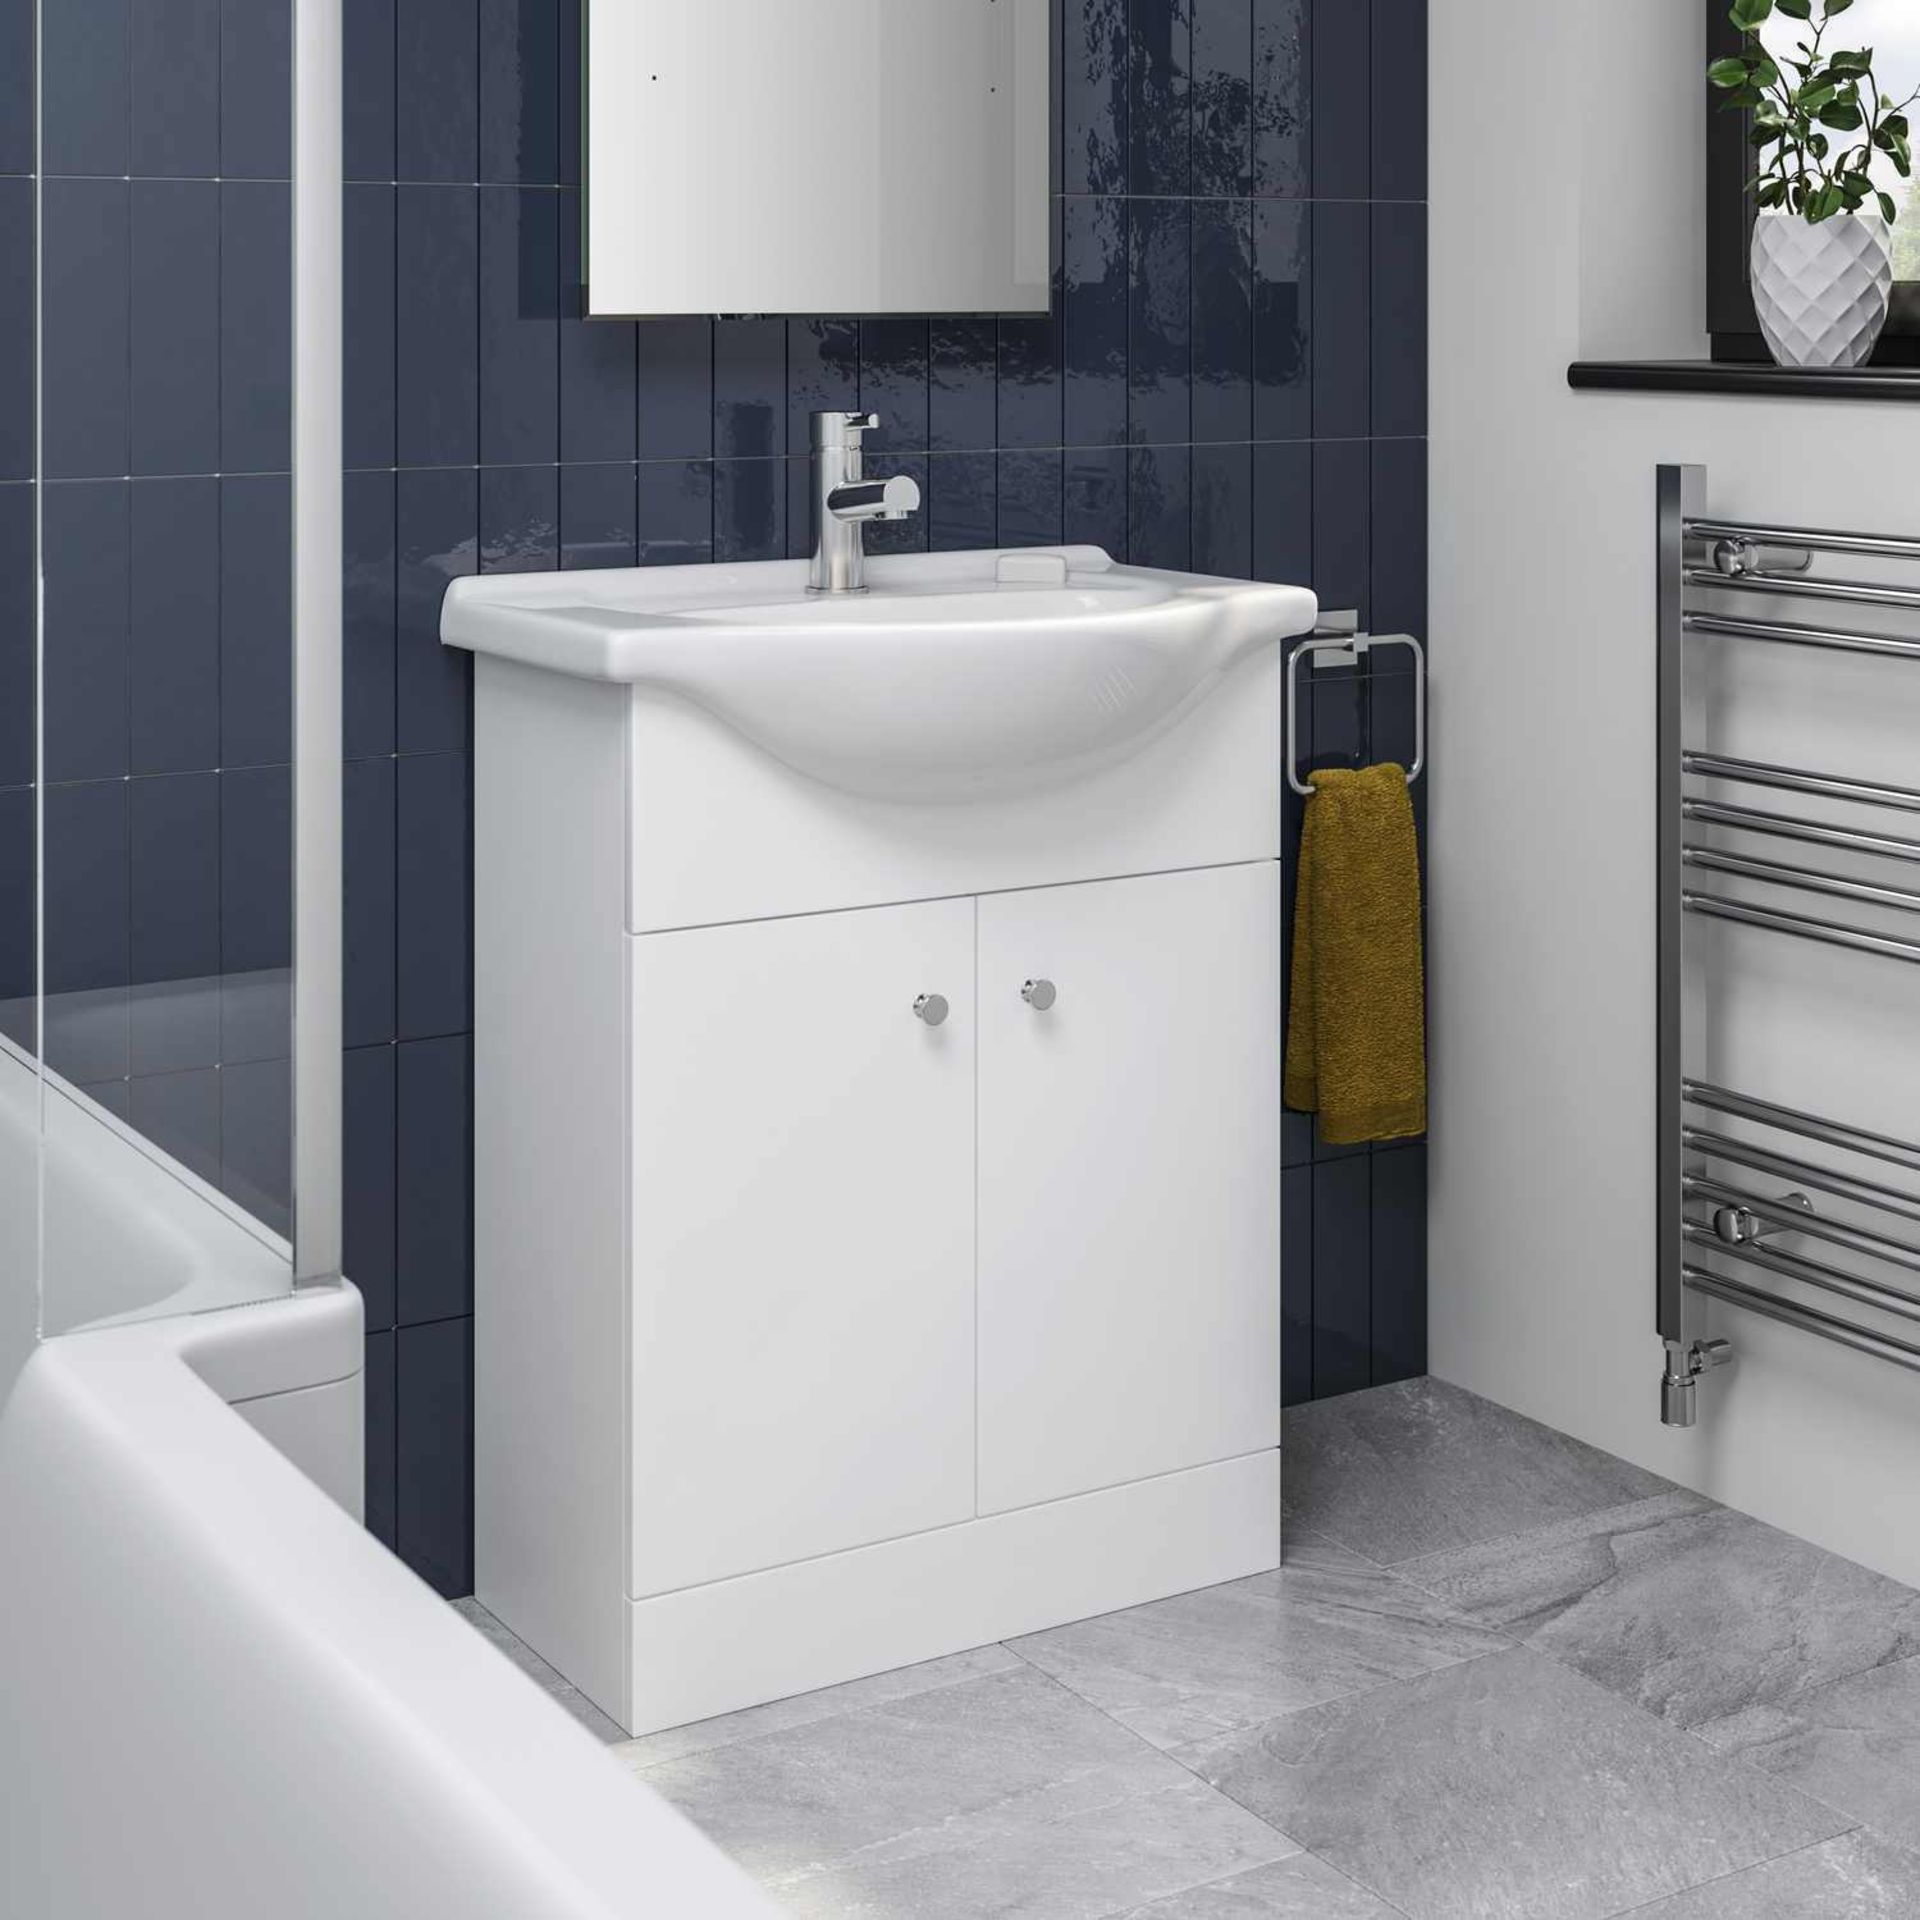 NEW & BOXED 650mm Quartz White Basin Vanity Unit- Floor Standing. RRP £399.99.Comes complete ... - Image 3 of 3